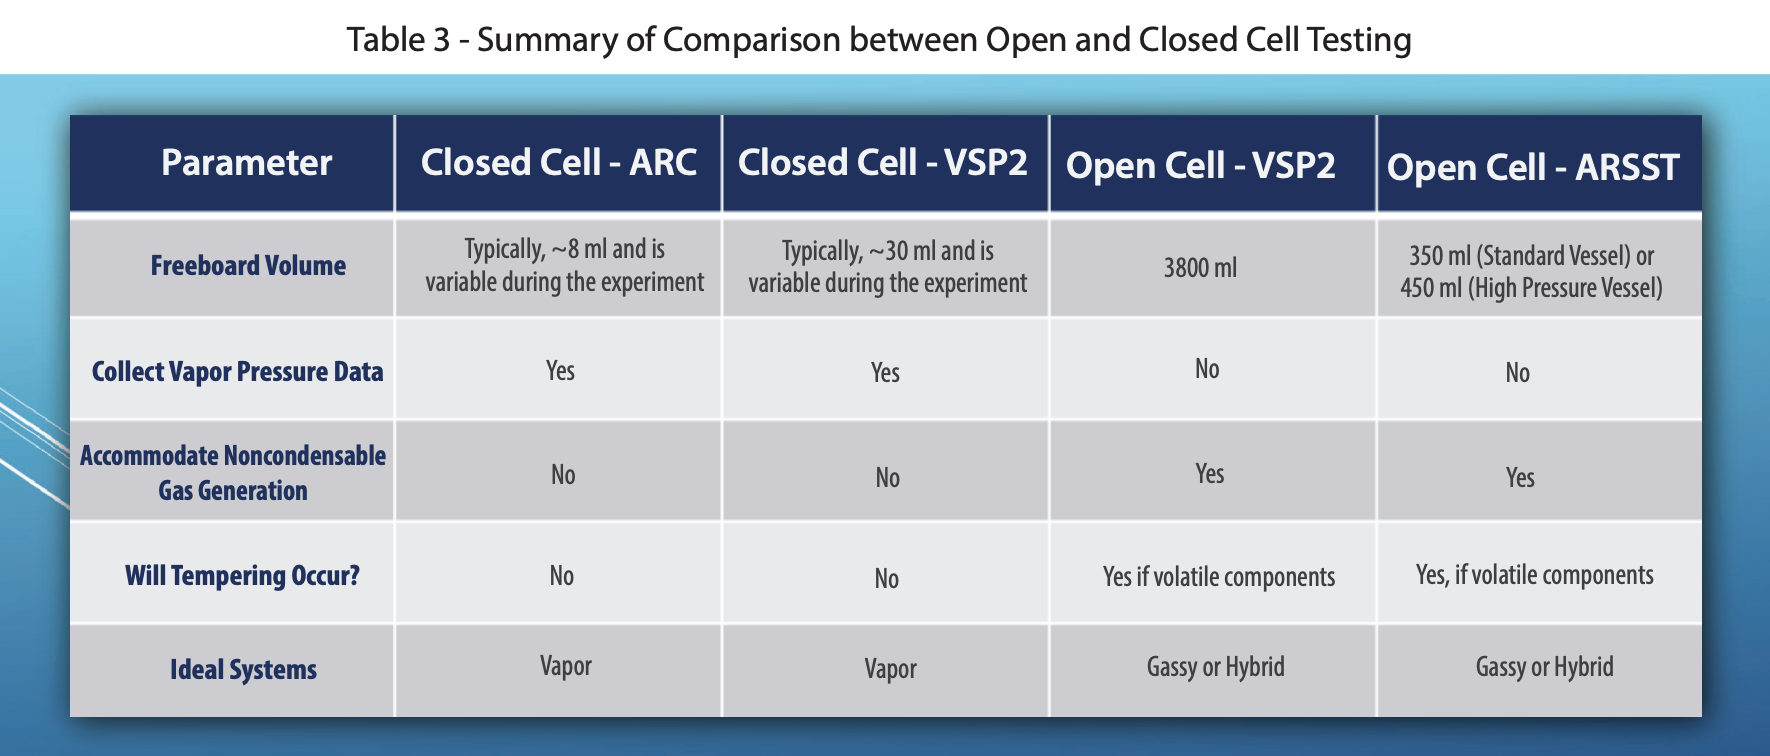 Table 3 - Summary of Comparison between Open and Closed Cell Testing